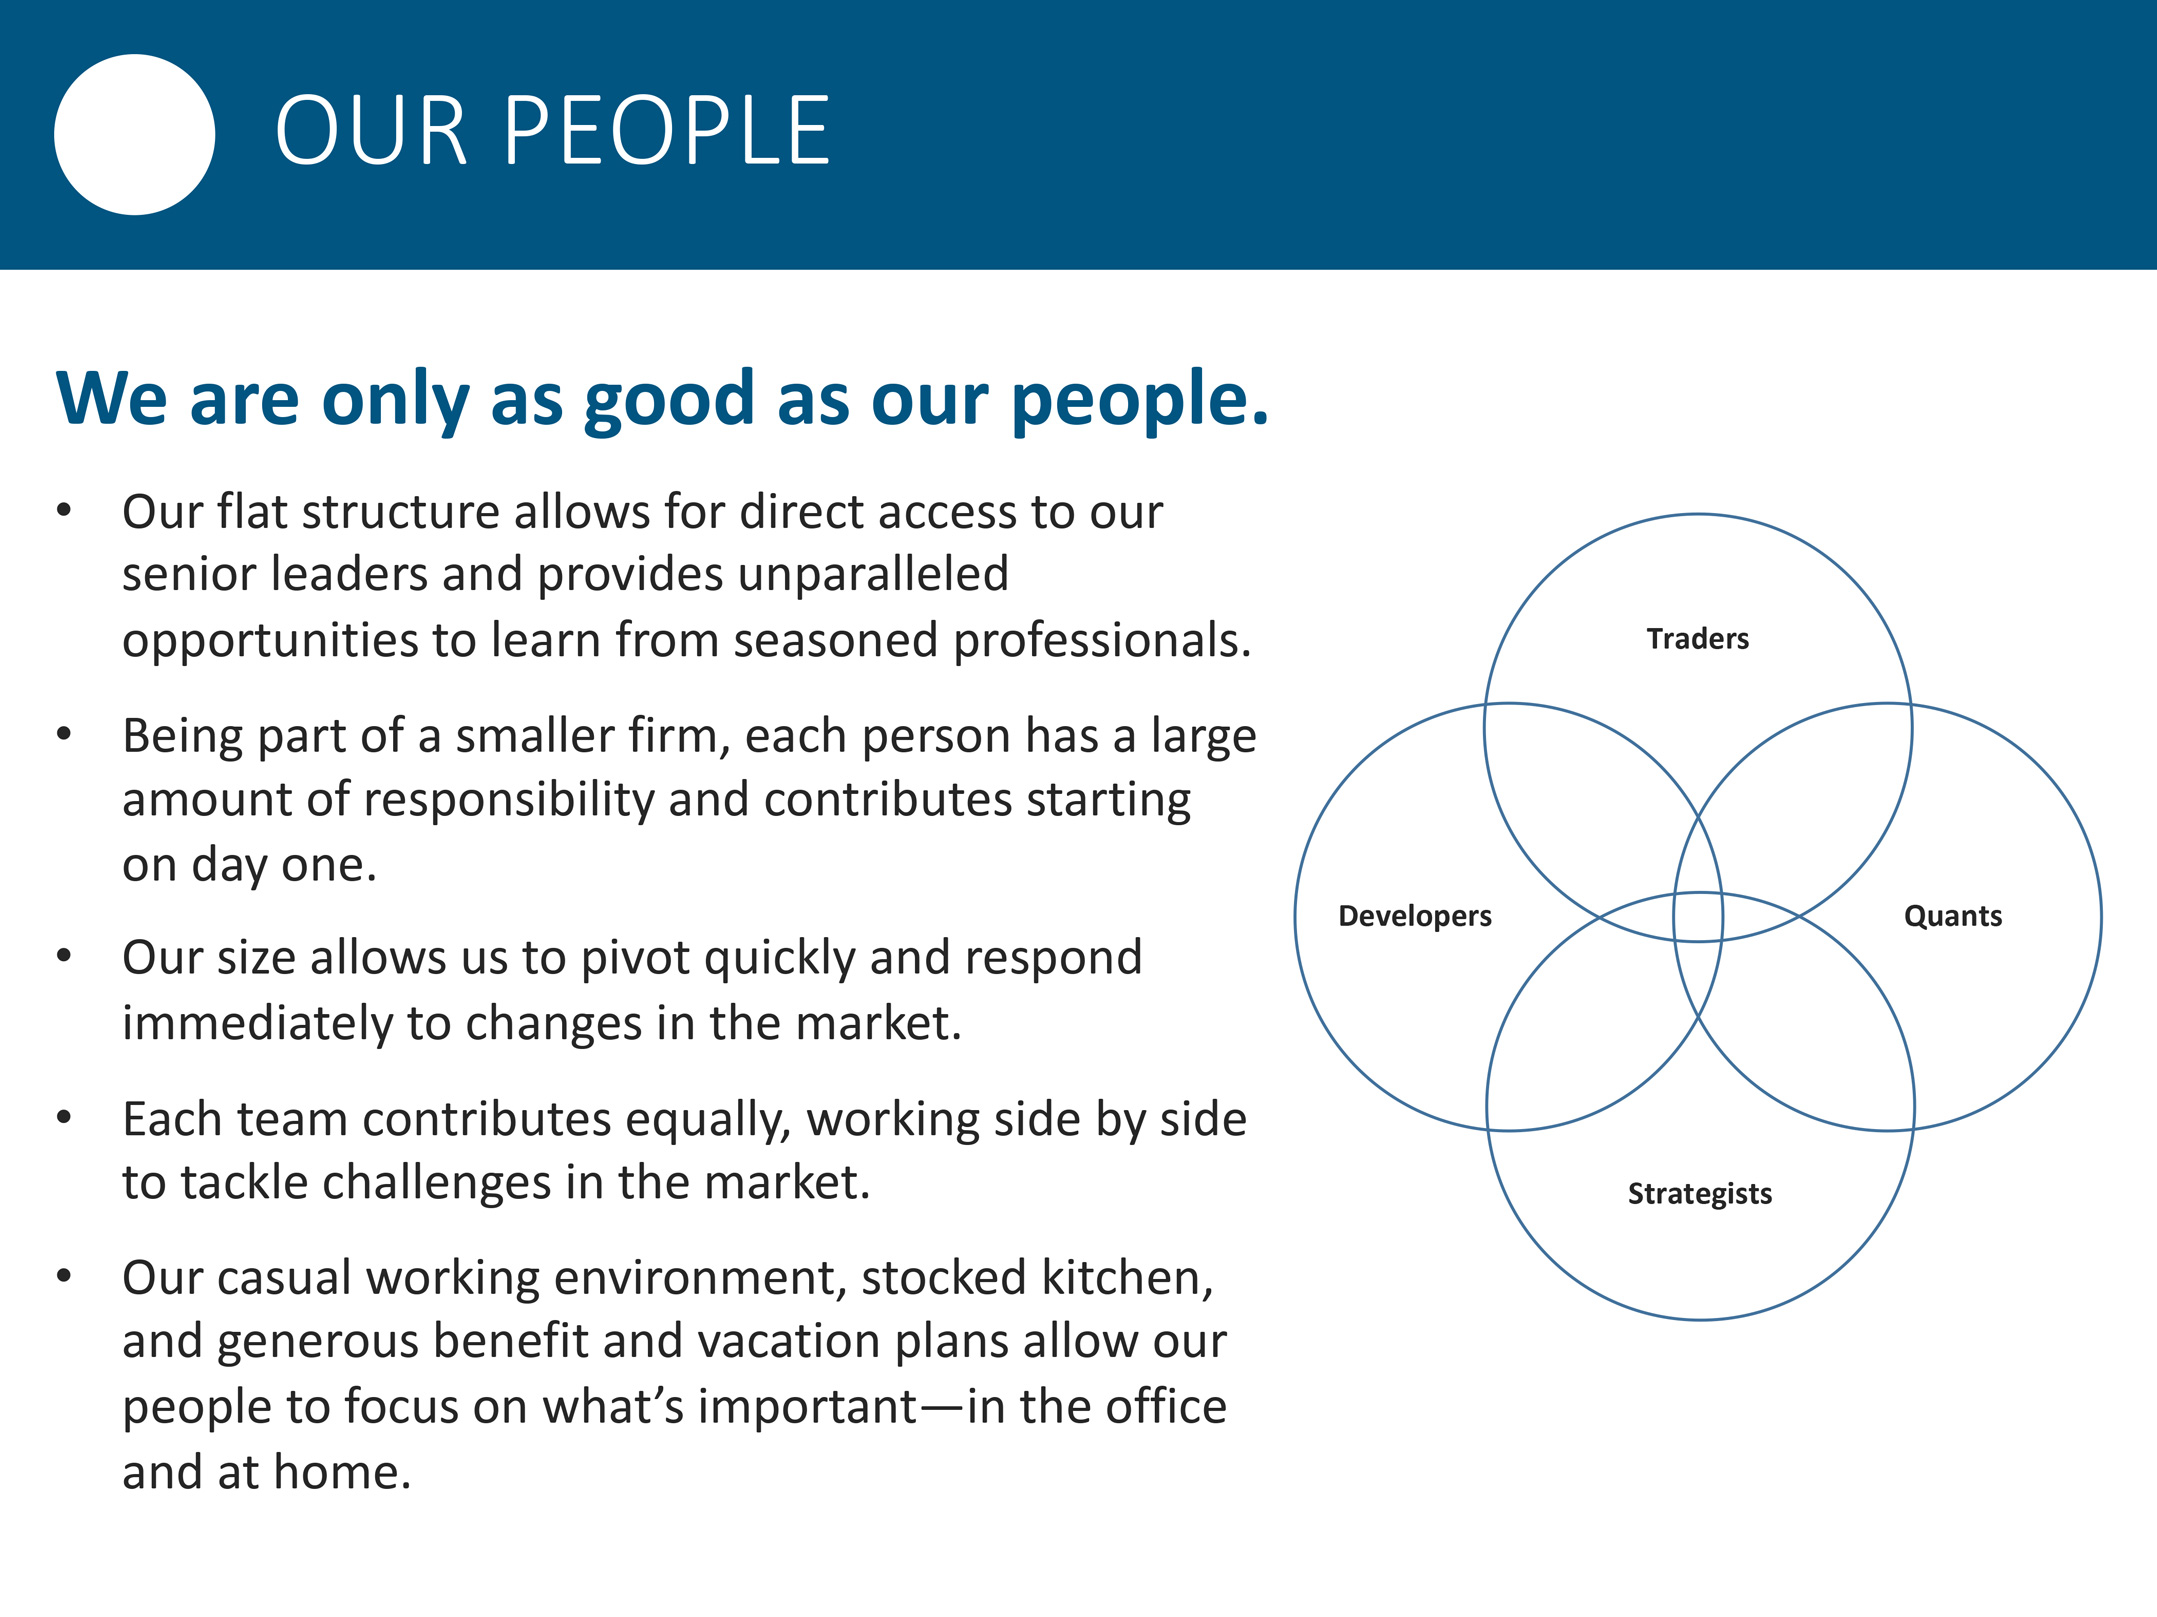 Slide for an options-trading firm. The slide begins with a statement: 'We are only as good as our people.' Bullet points follow. On the right-hand side is a Venn diagram listing roles: traders, quants, strategists, and developers.